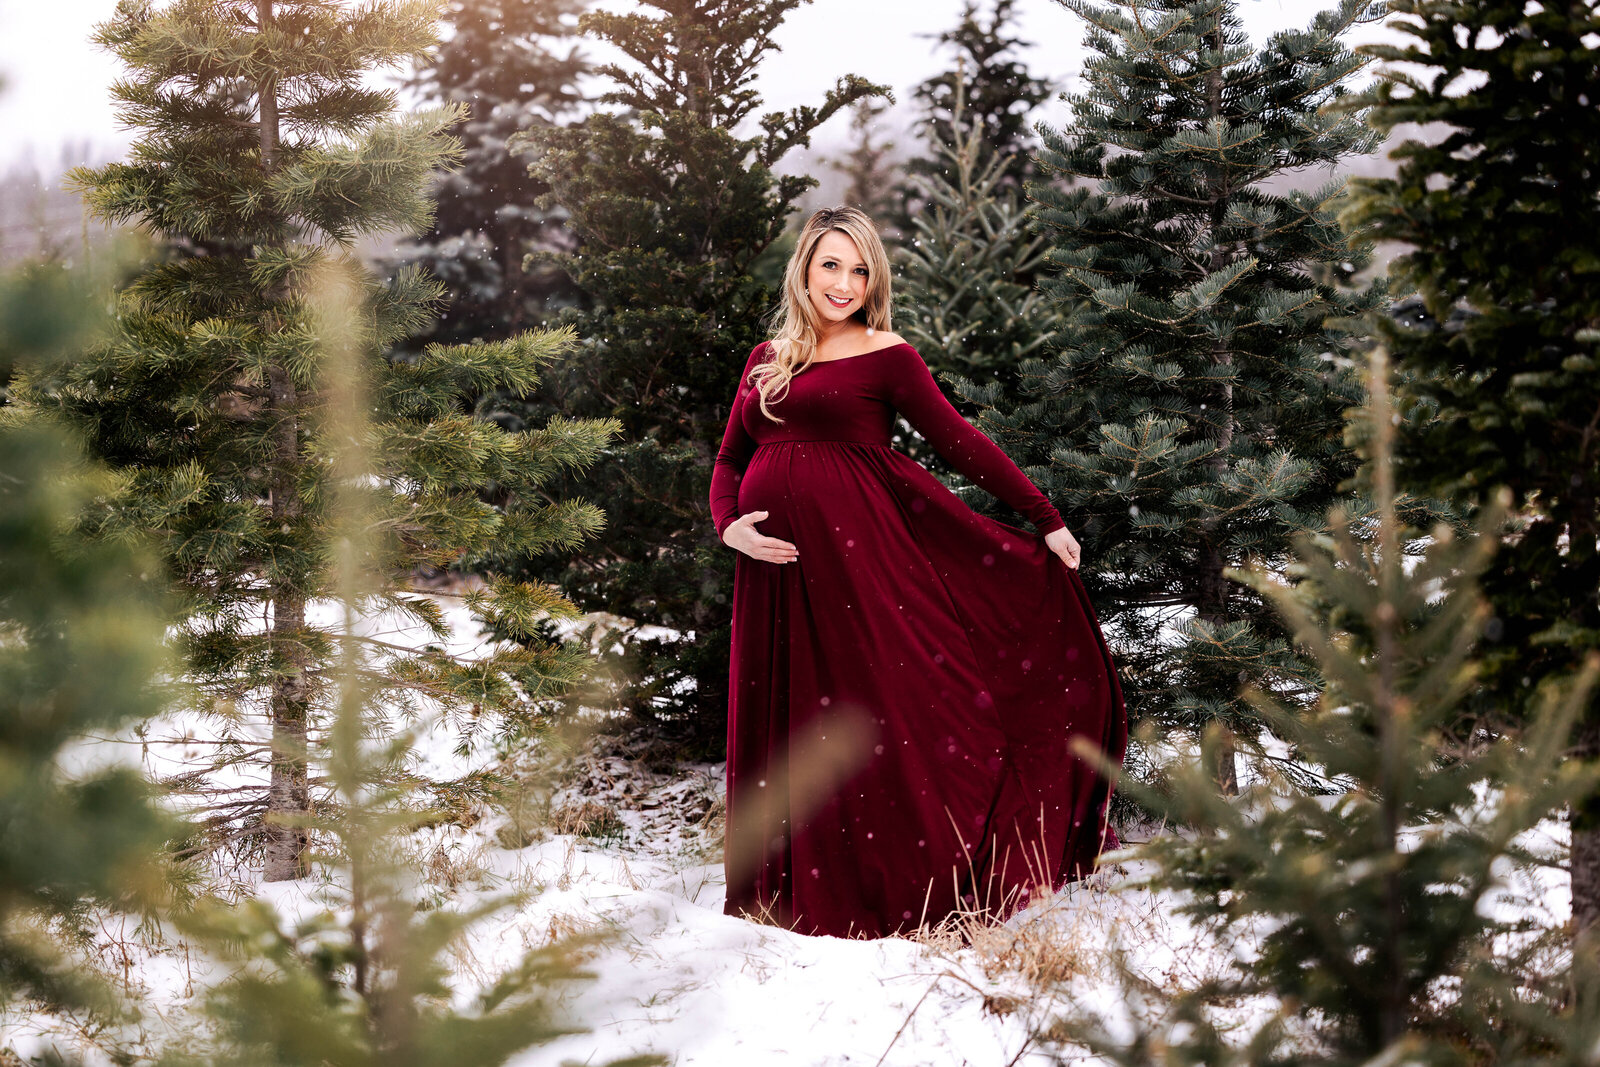 Mother-to-be in red gown poses amongst a field of pine trees